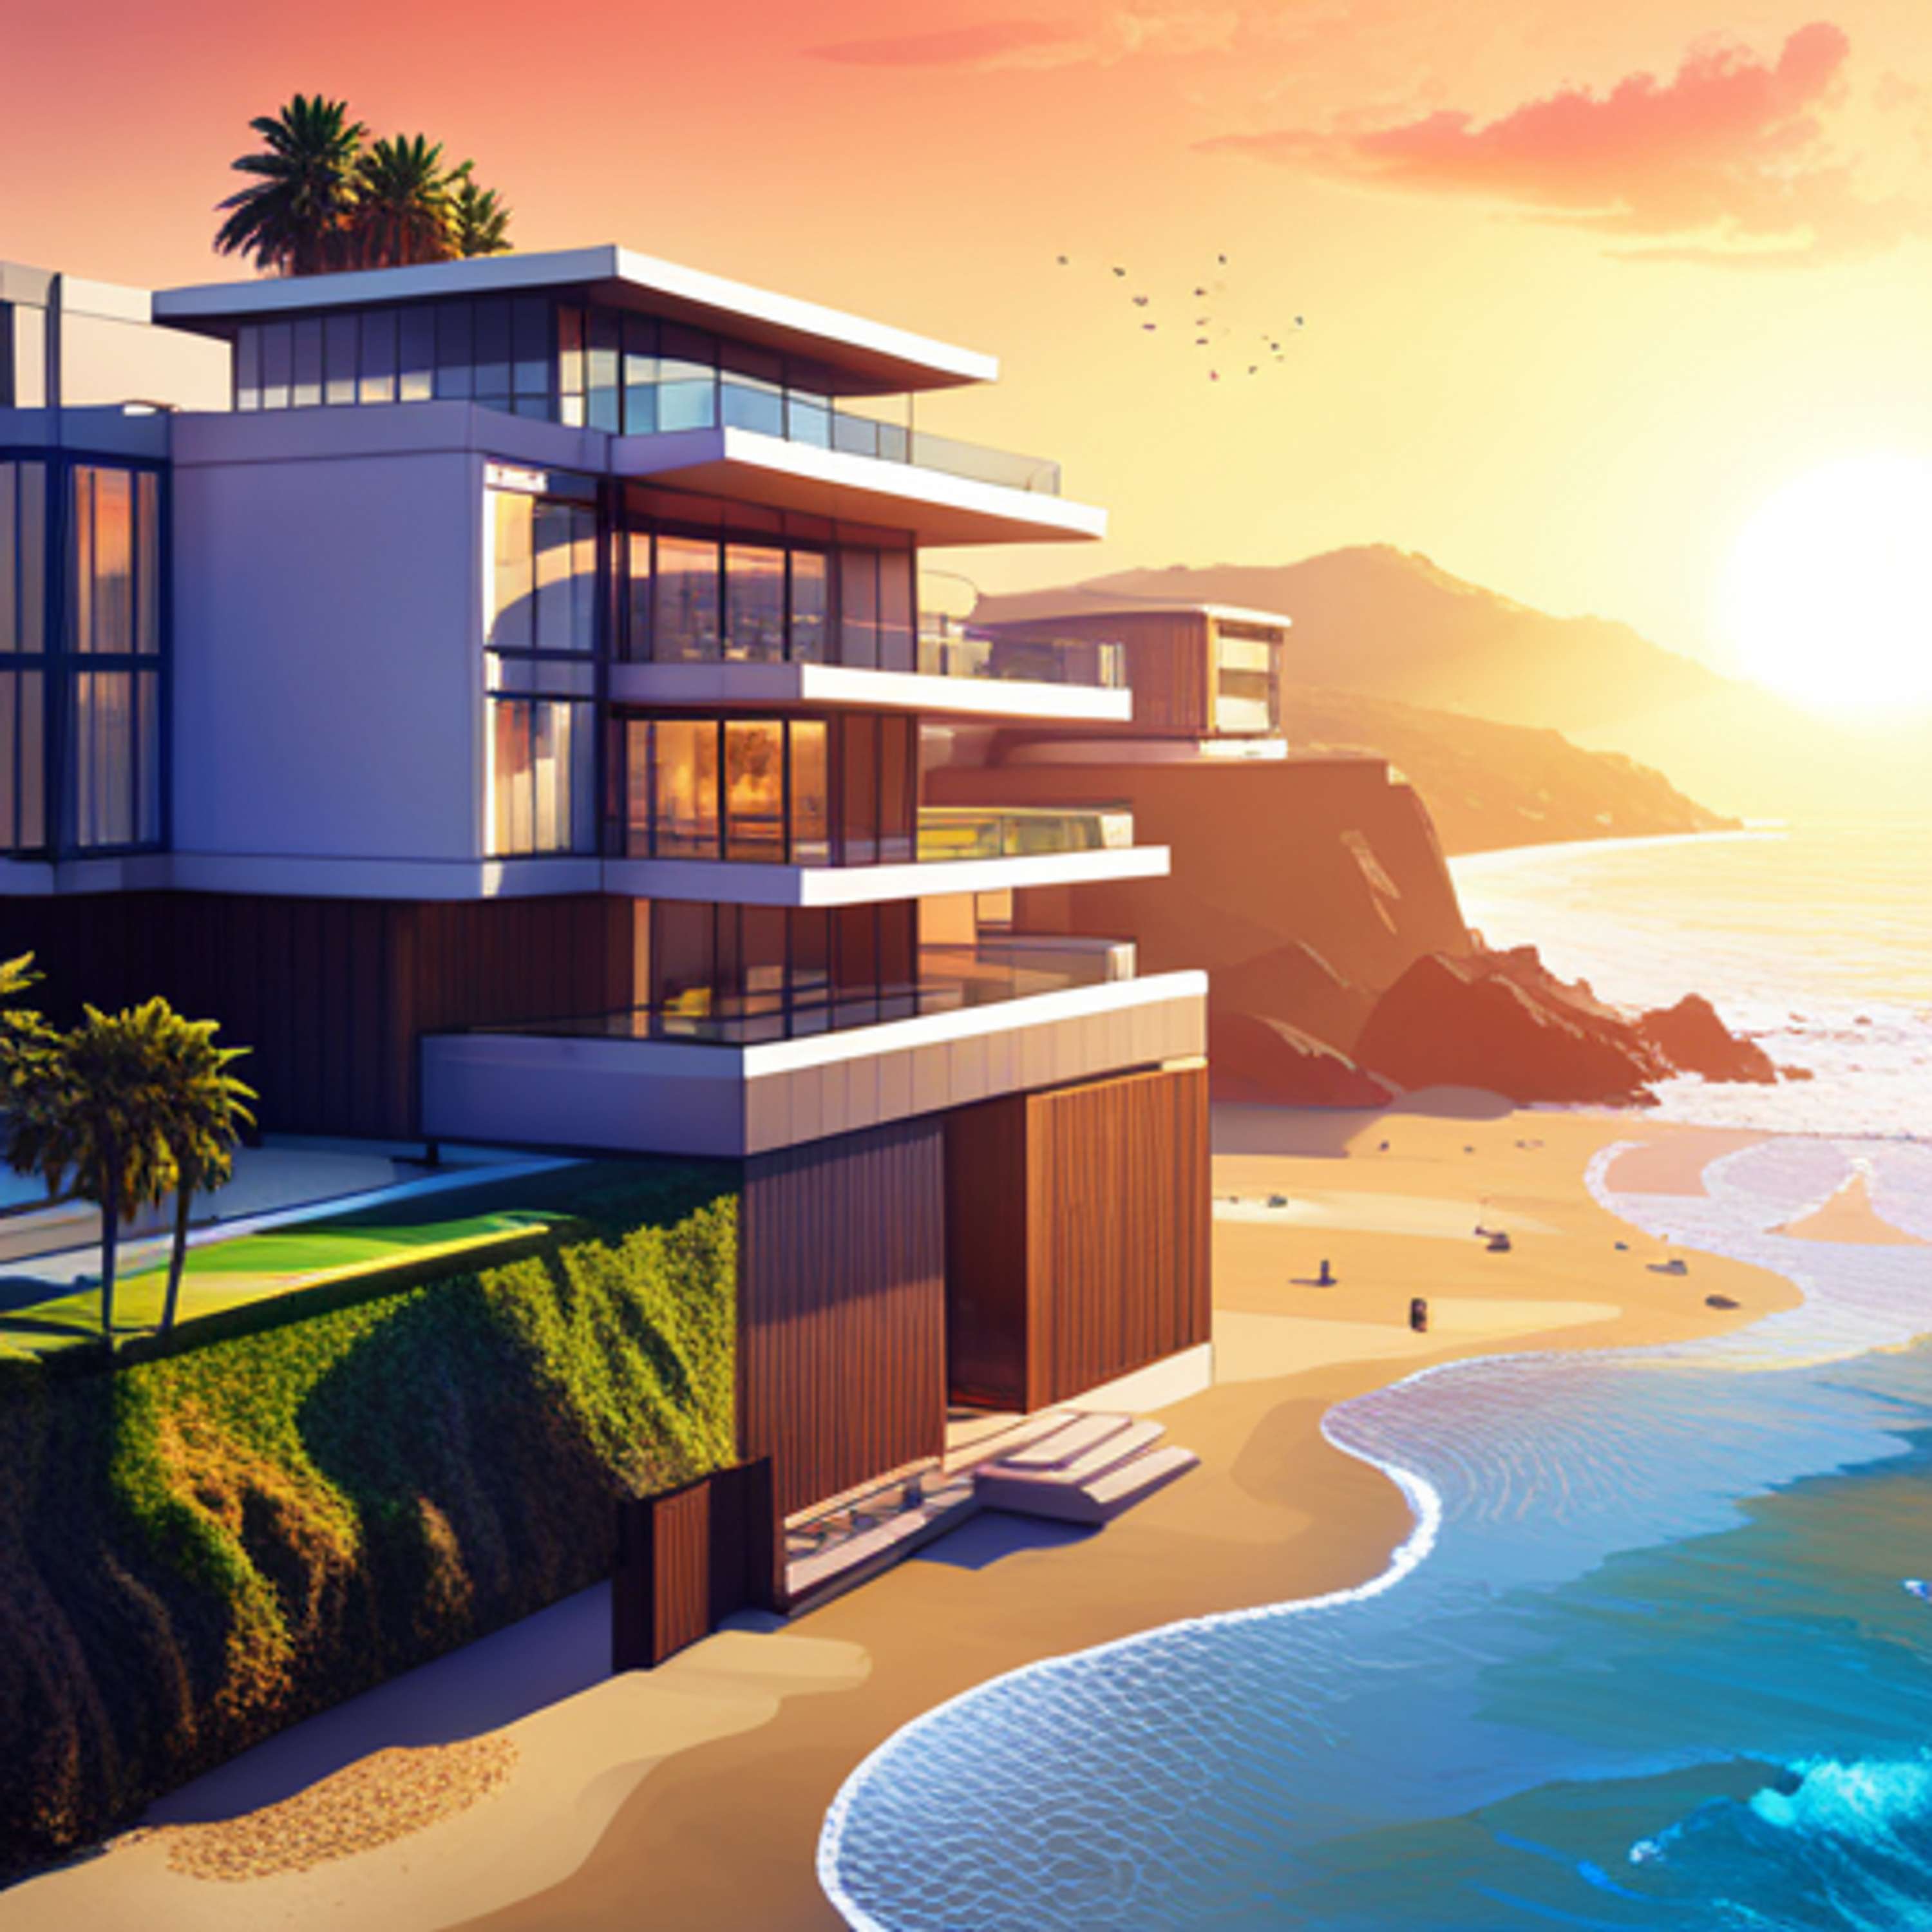 Luxury Malibu Real Estate: Insider Tips for Finding Your Ocean View Sanctuary